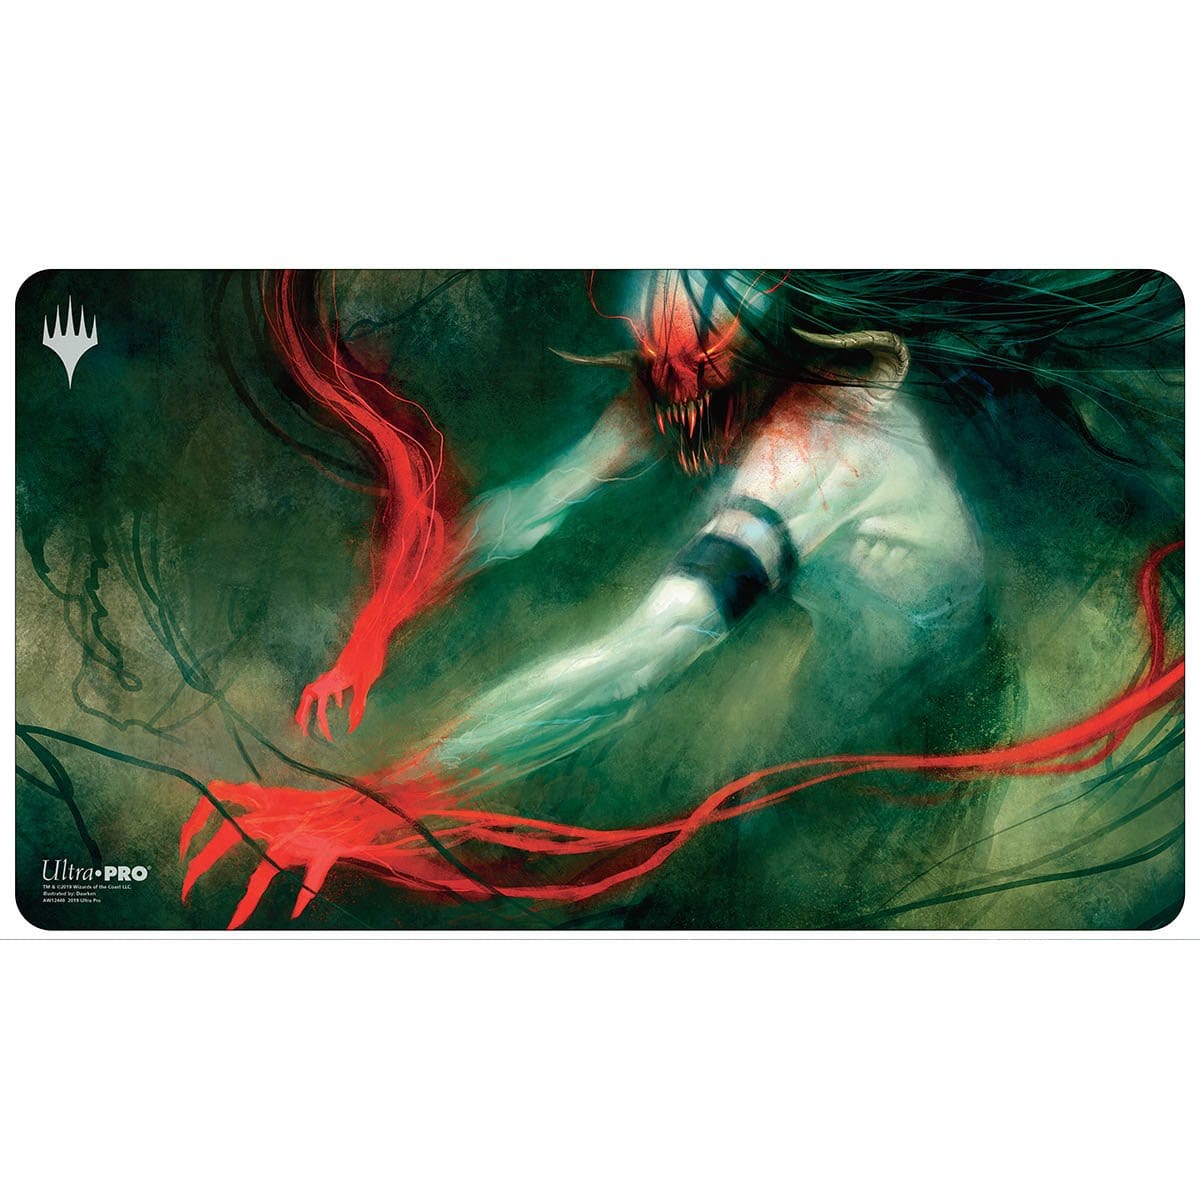 Bloodghast Playmat - Playmat - Original Magic Art - Accessories for Magic the Gathering and other card games